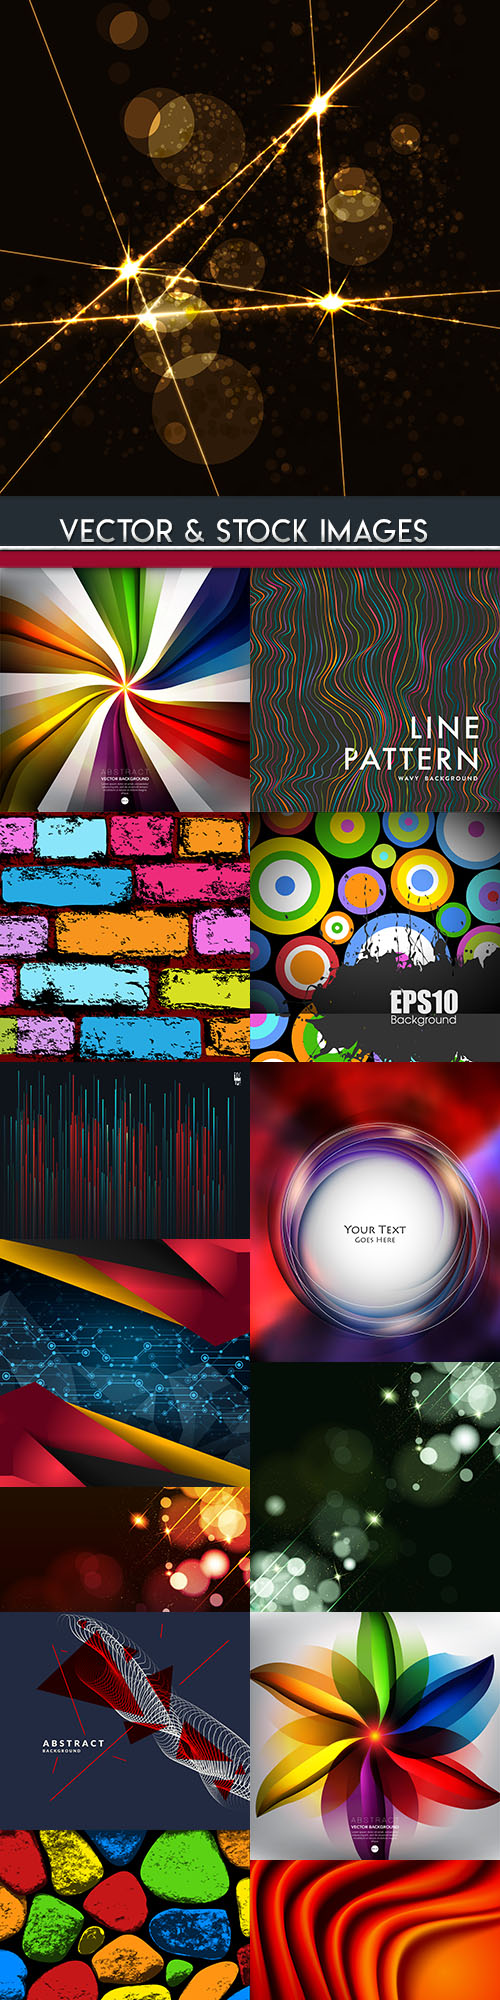 Modern abstract backgrounds decorative collection 25